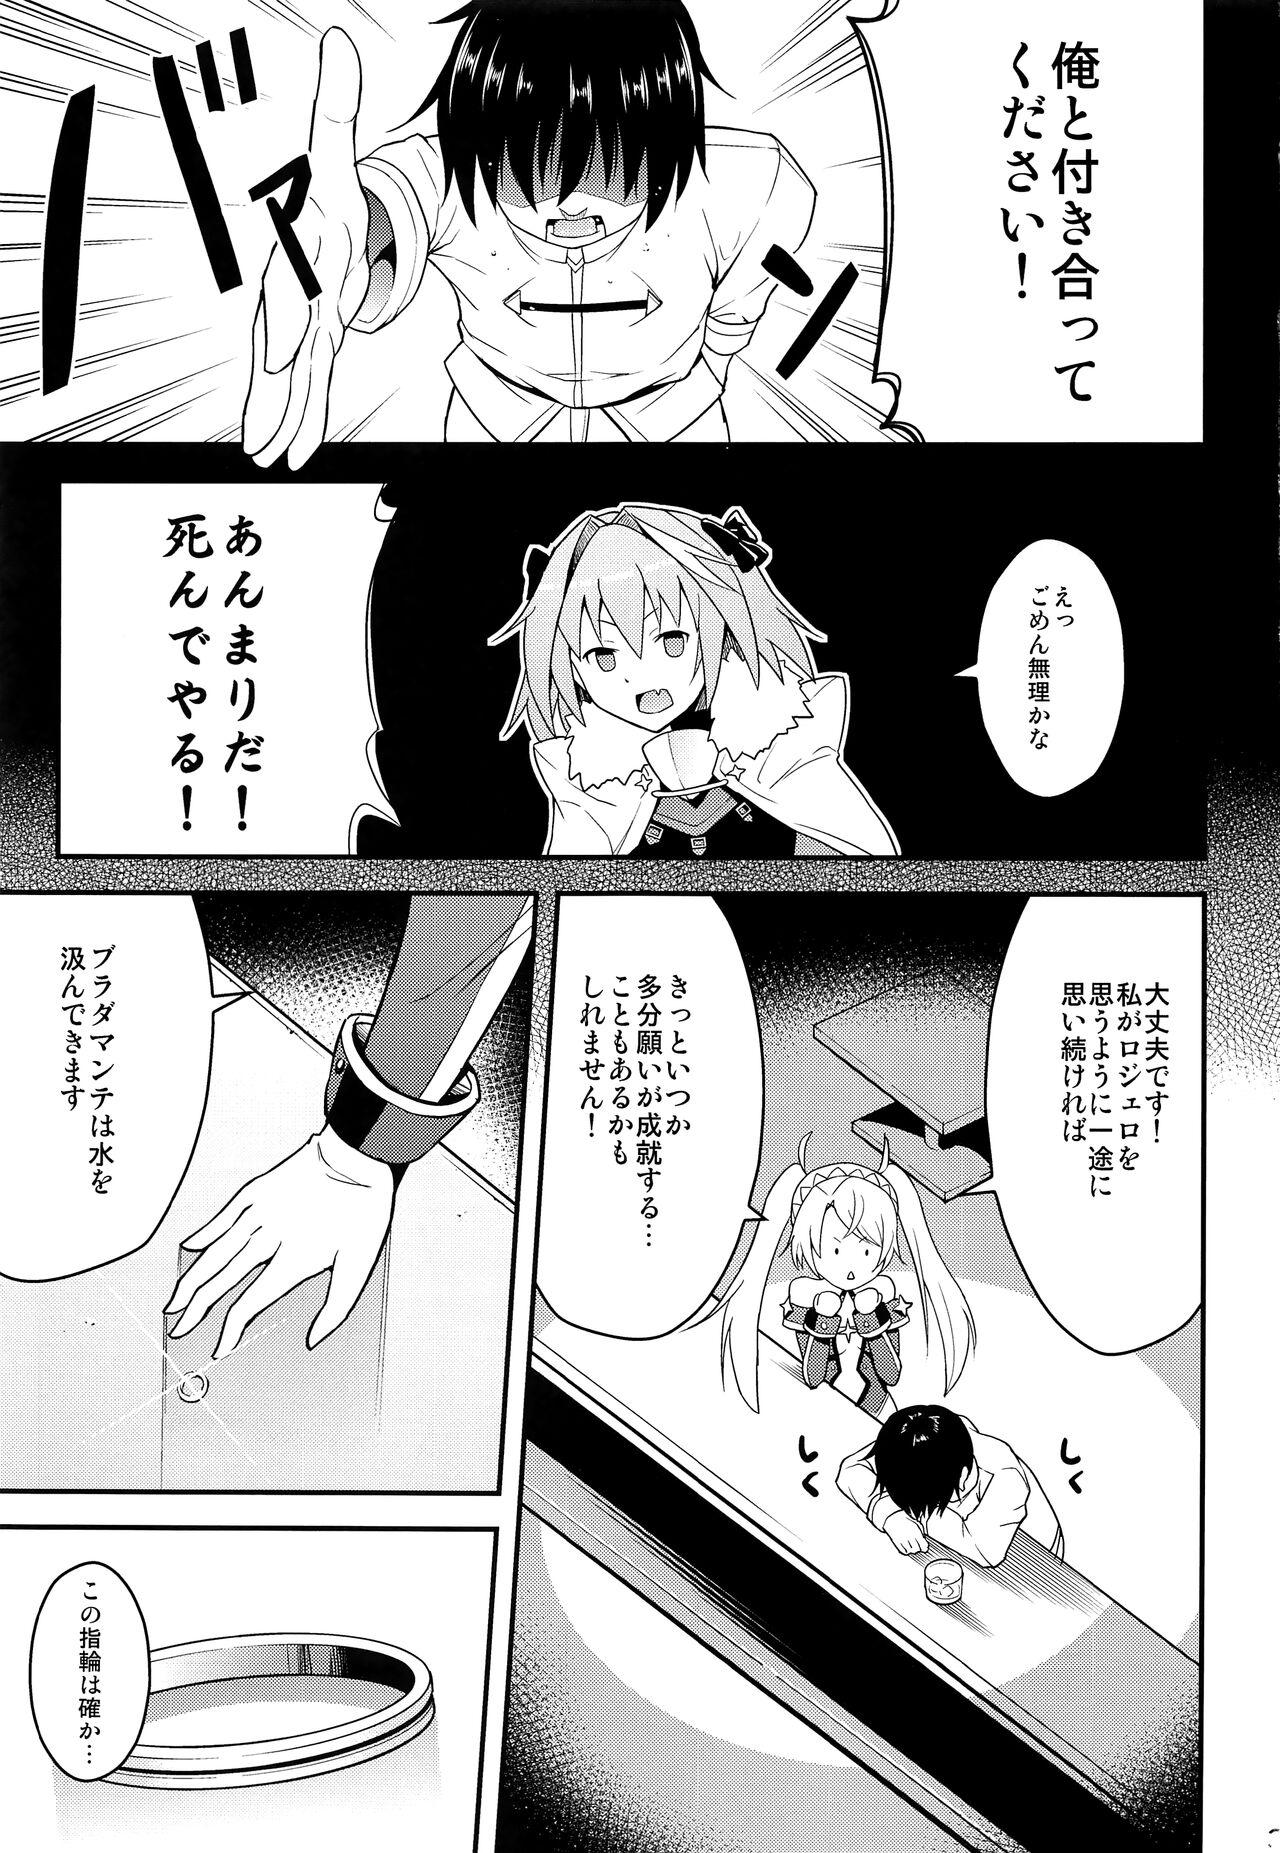 Best Blowjobs Ever Astolfo VS Toumei Ningen - Fate grand order Perrito - Page 2